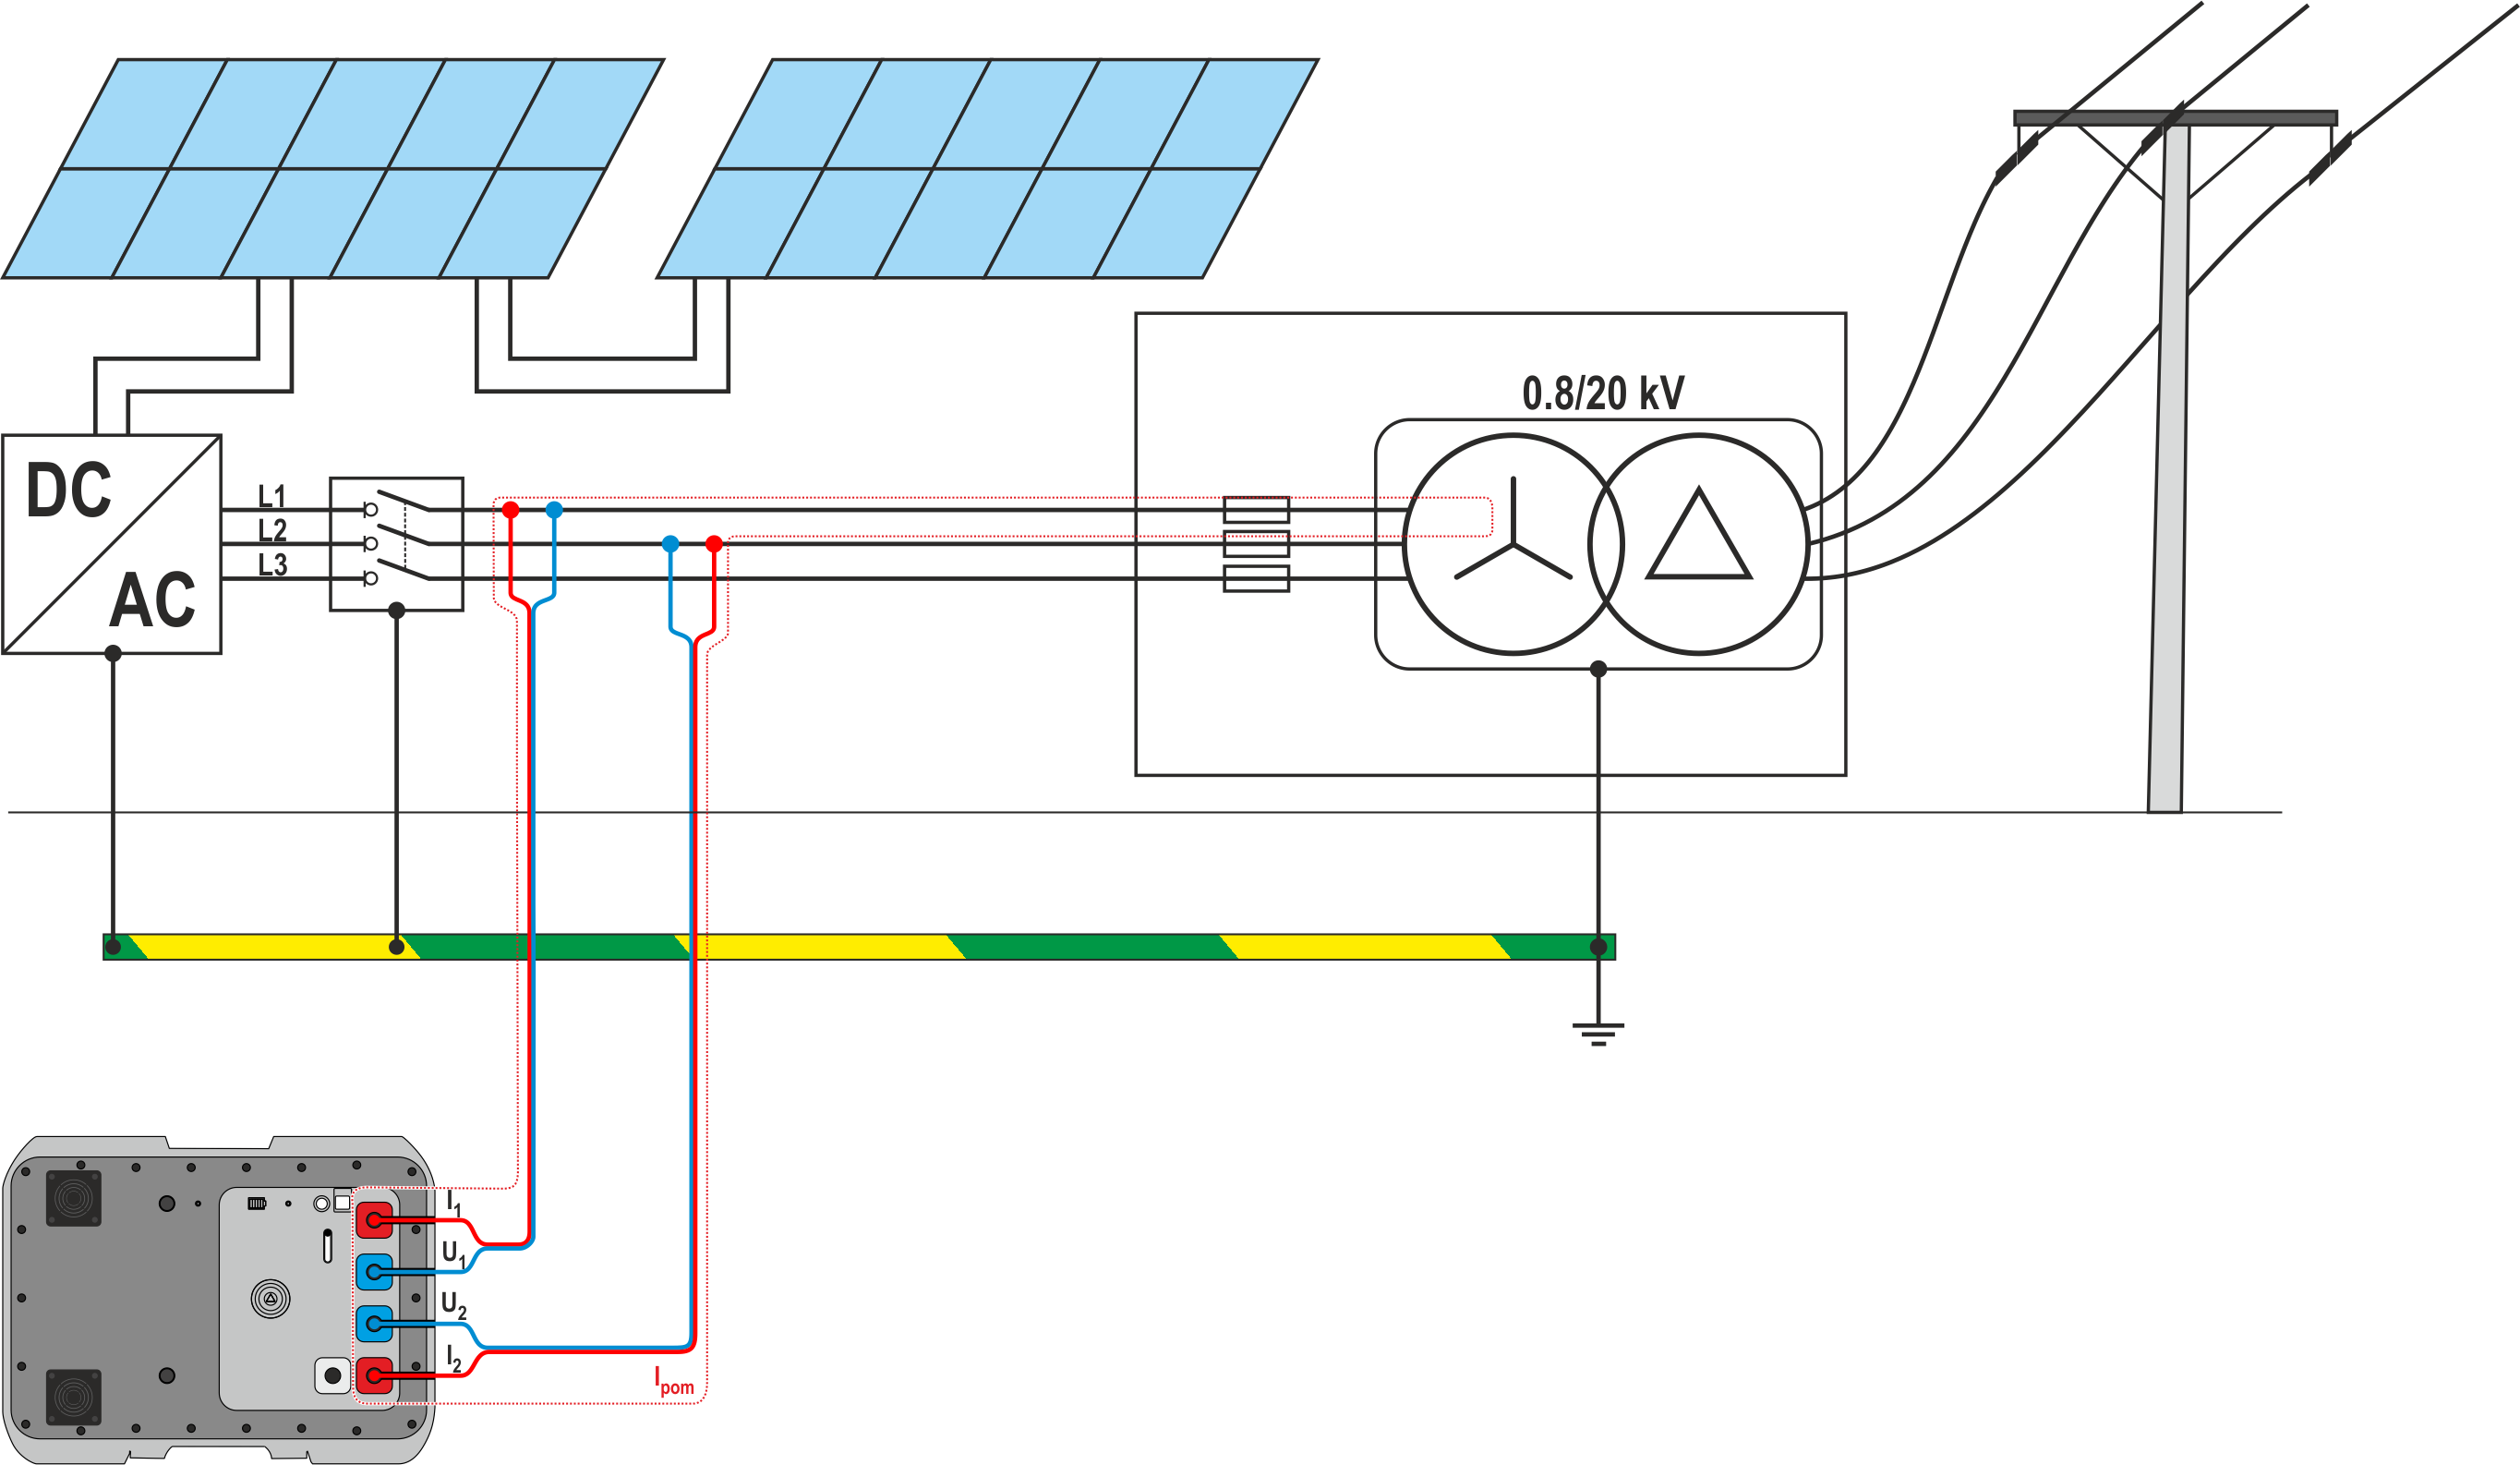 Measuring a solar photovoltaic farm with an 800V AC IT network